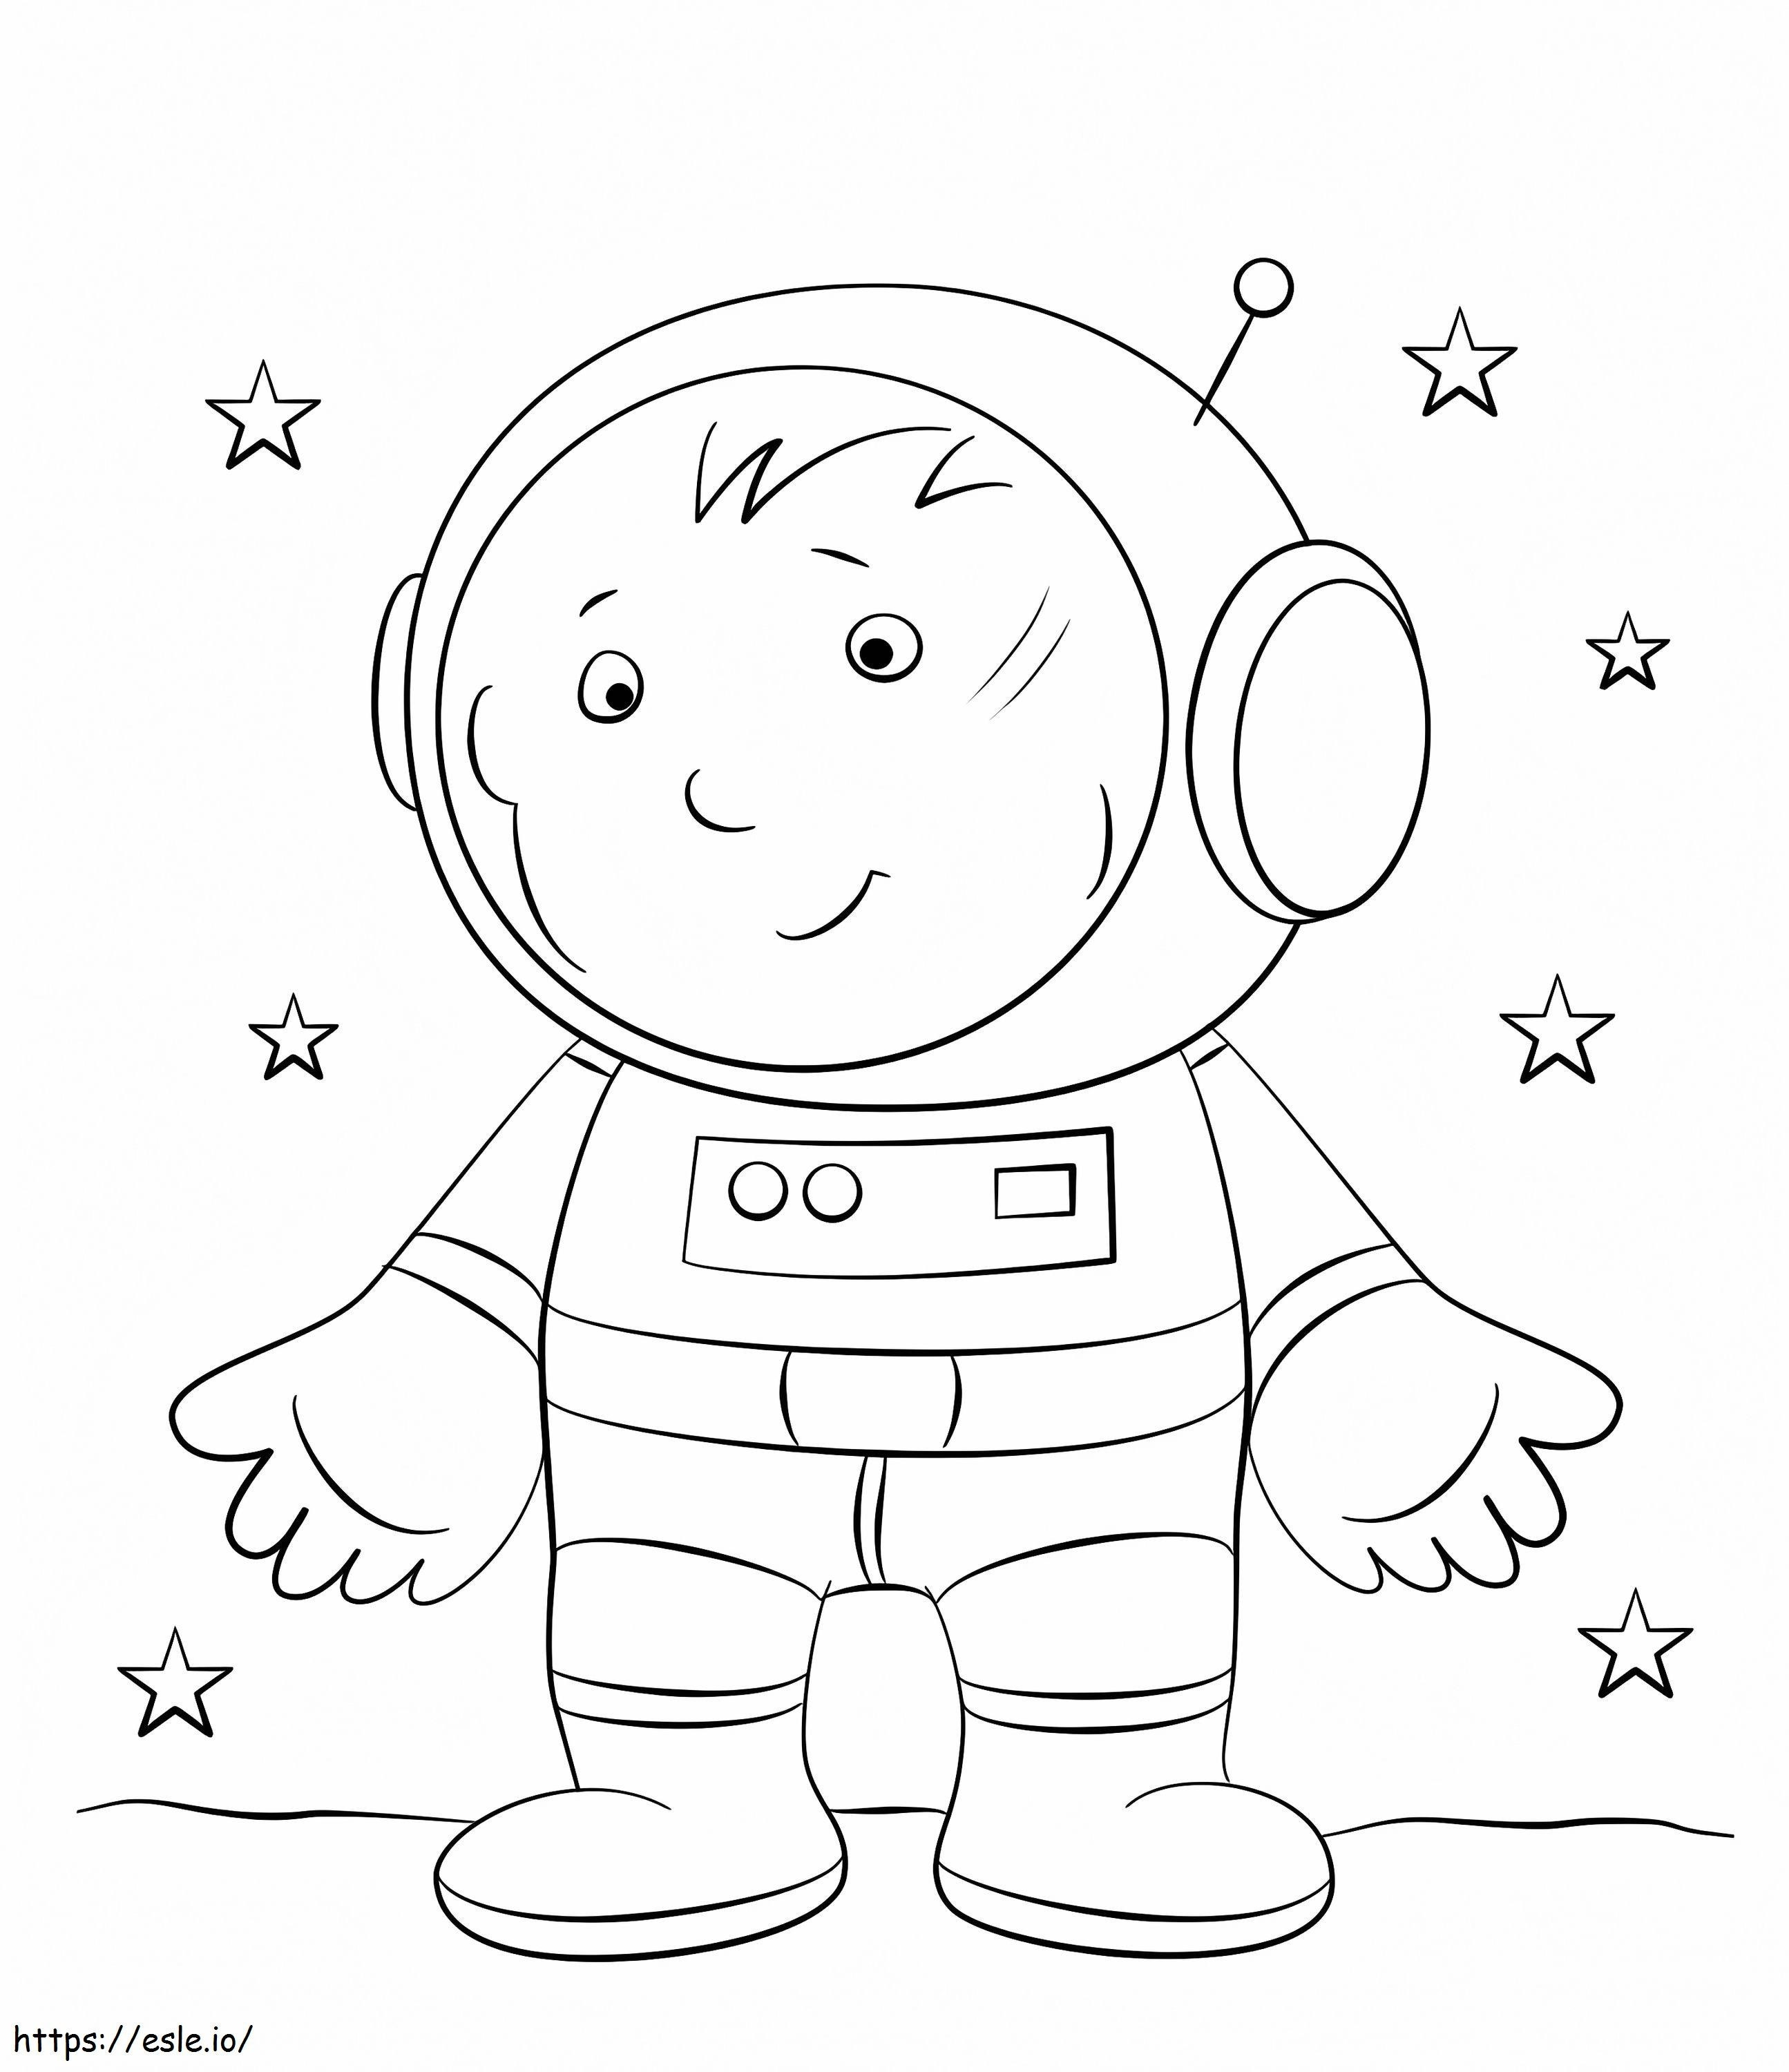 1559870219 Boy Astronaut A4 coloring page